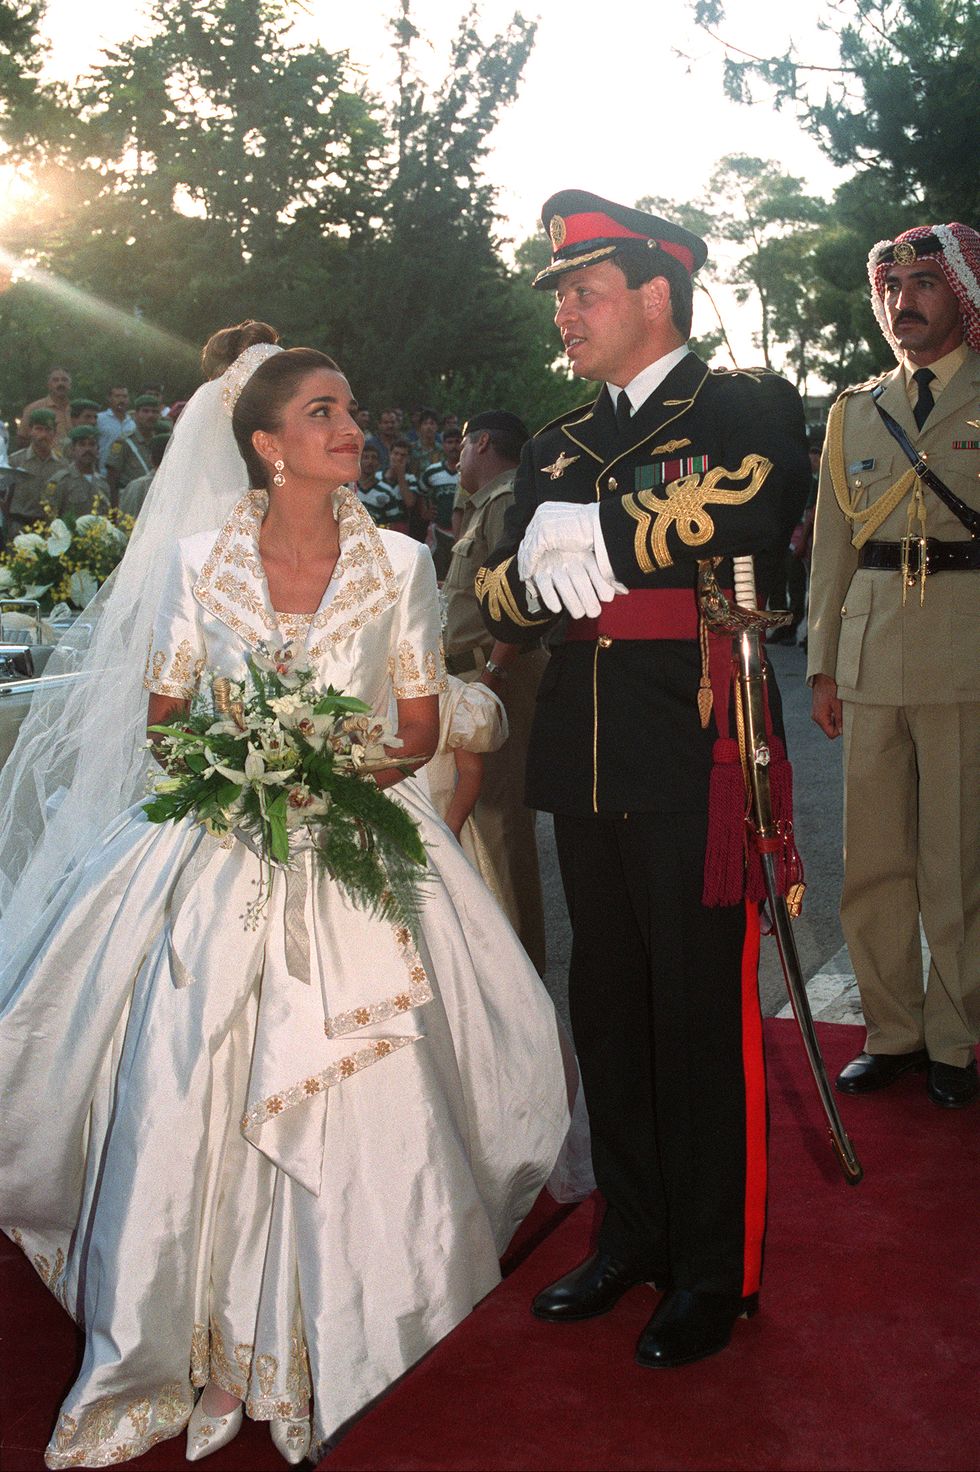 rania al yassin stands on a red carpet outside next to prince abdullah ii, she looks at him smiling and wearing an ornate ballgown style wedding dress with a long veil, she also holds a bouquet of greenery and white flowers, he wears a black military uniform with white gloves and a hat